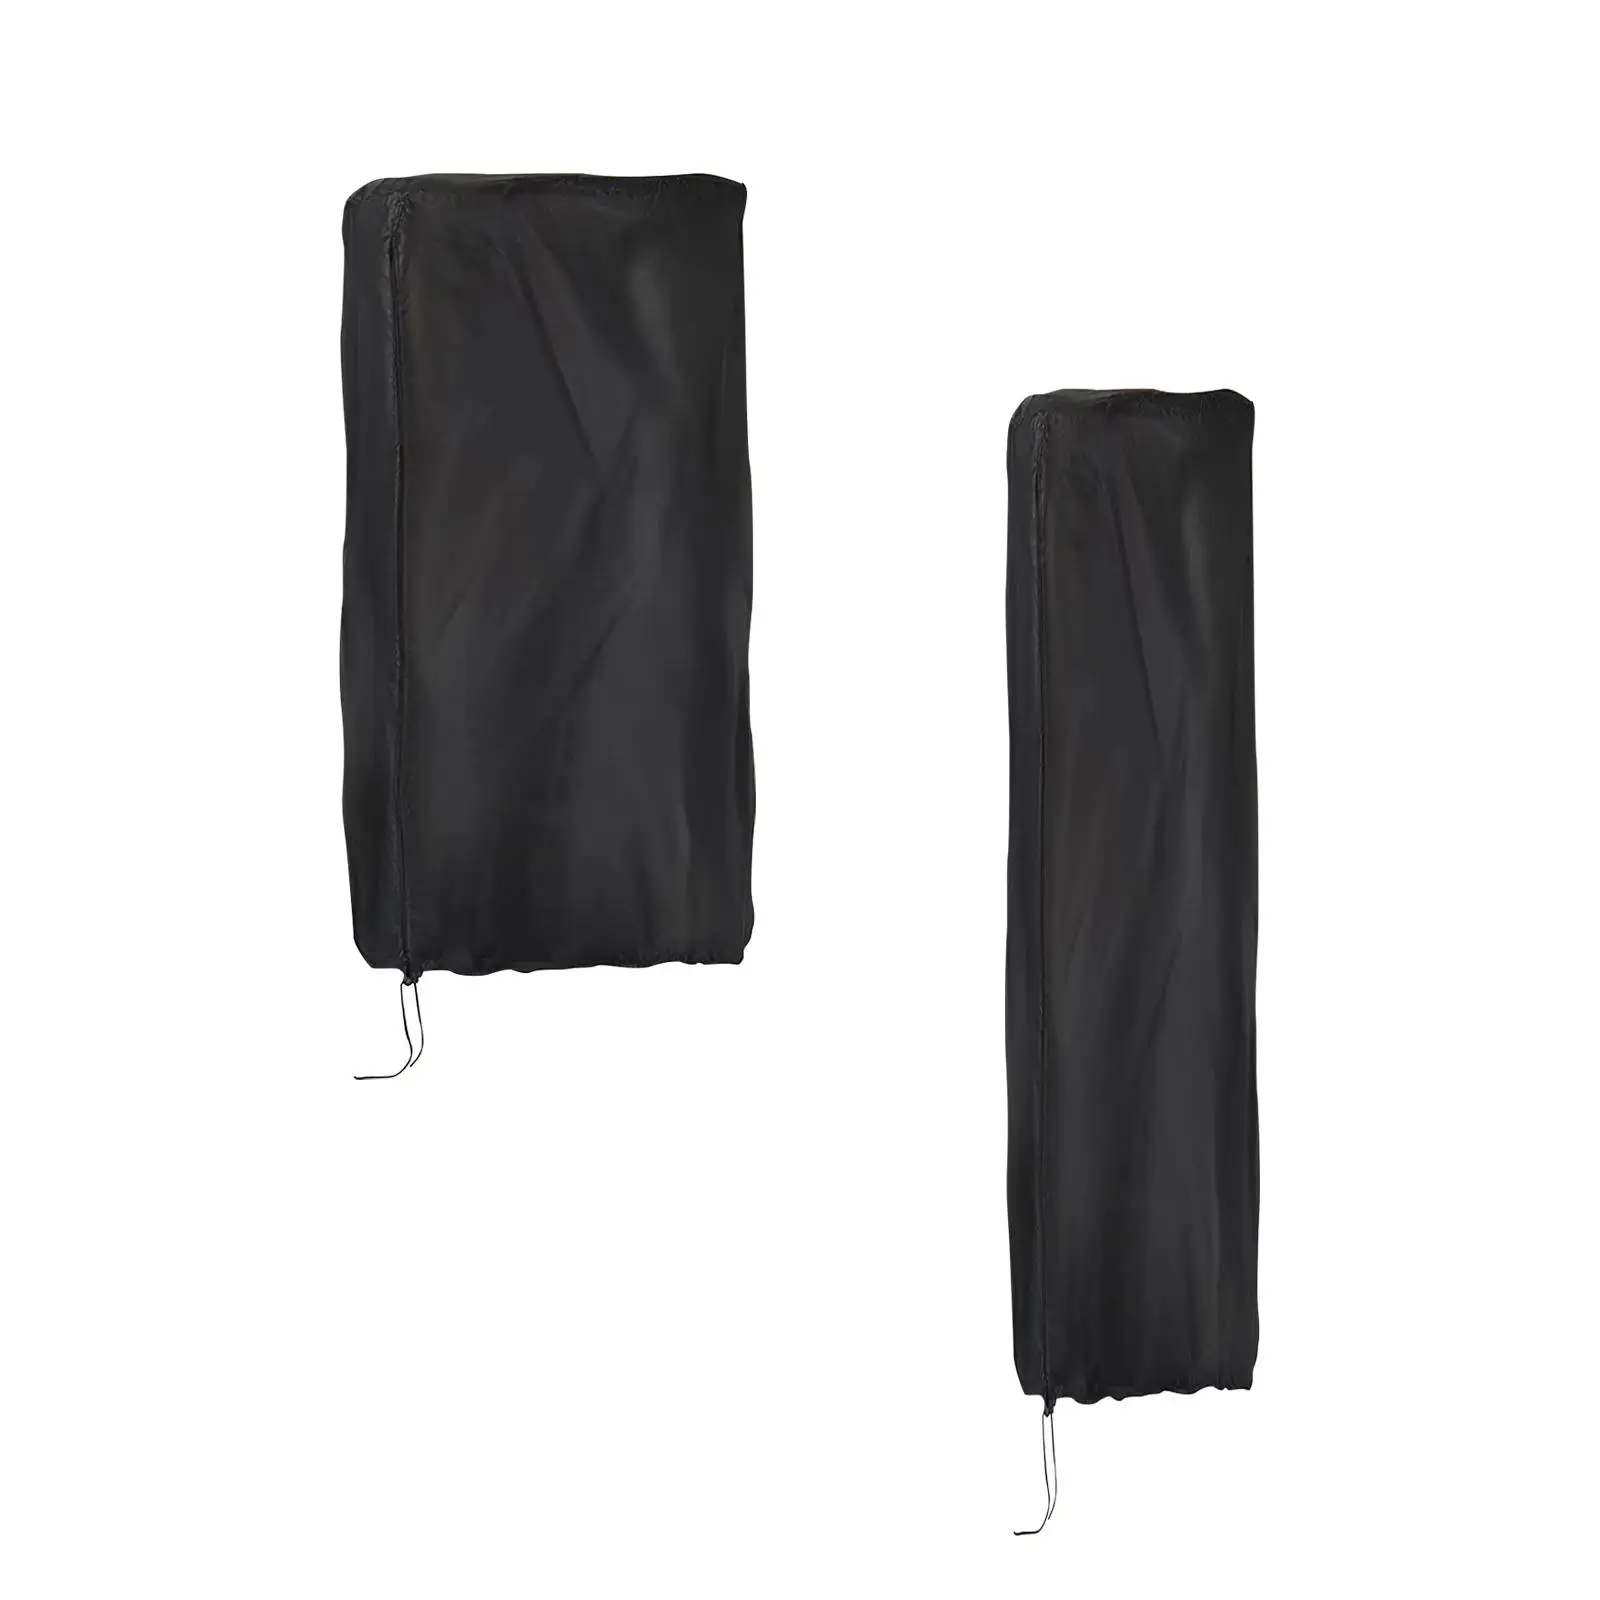 Punching Bag Cover Standing Cover Sun Protection Waterproof for Indoor Outdoor